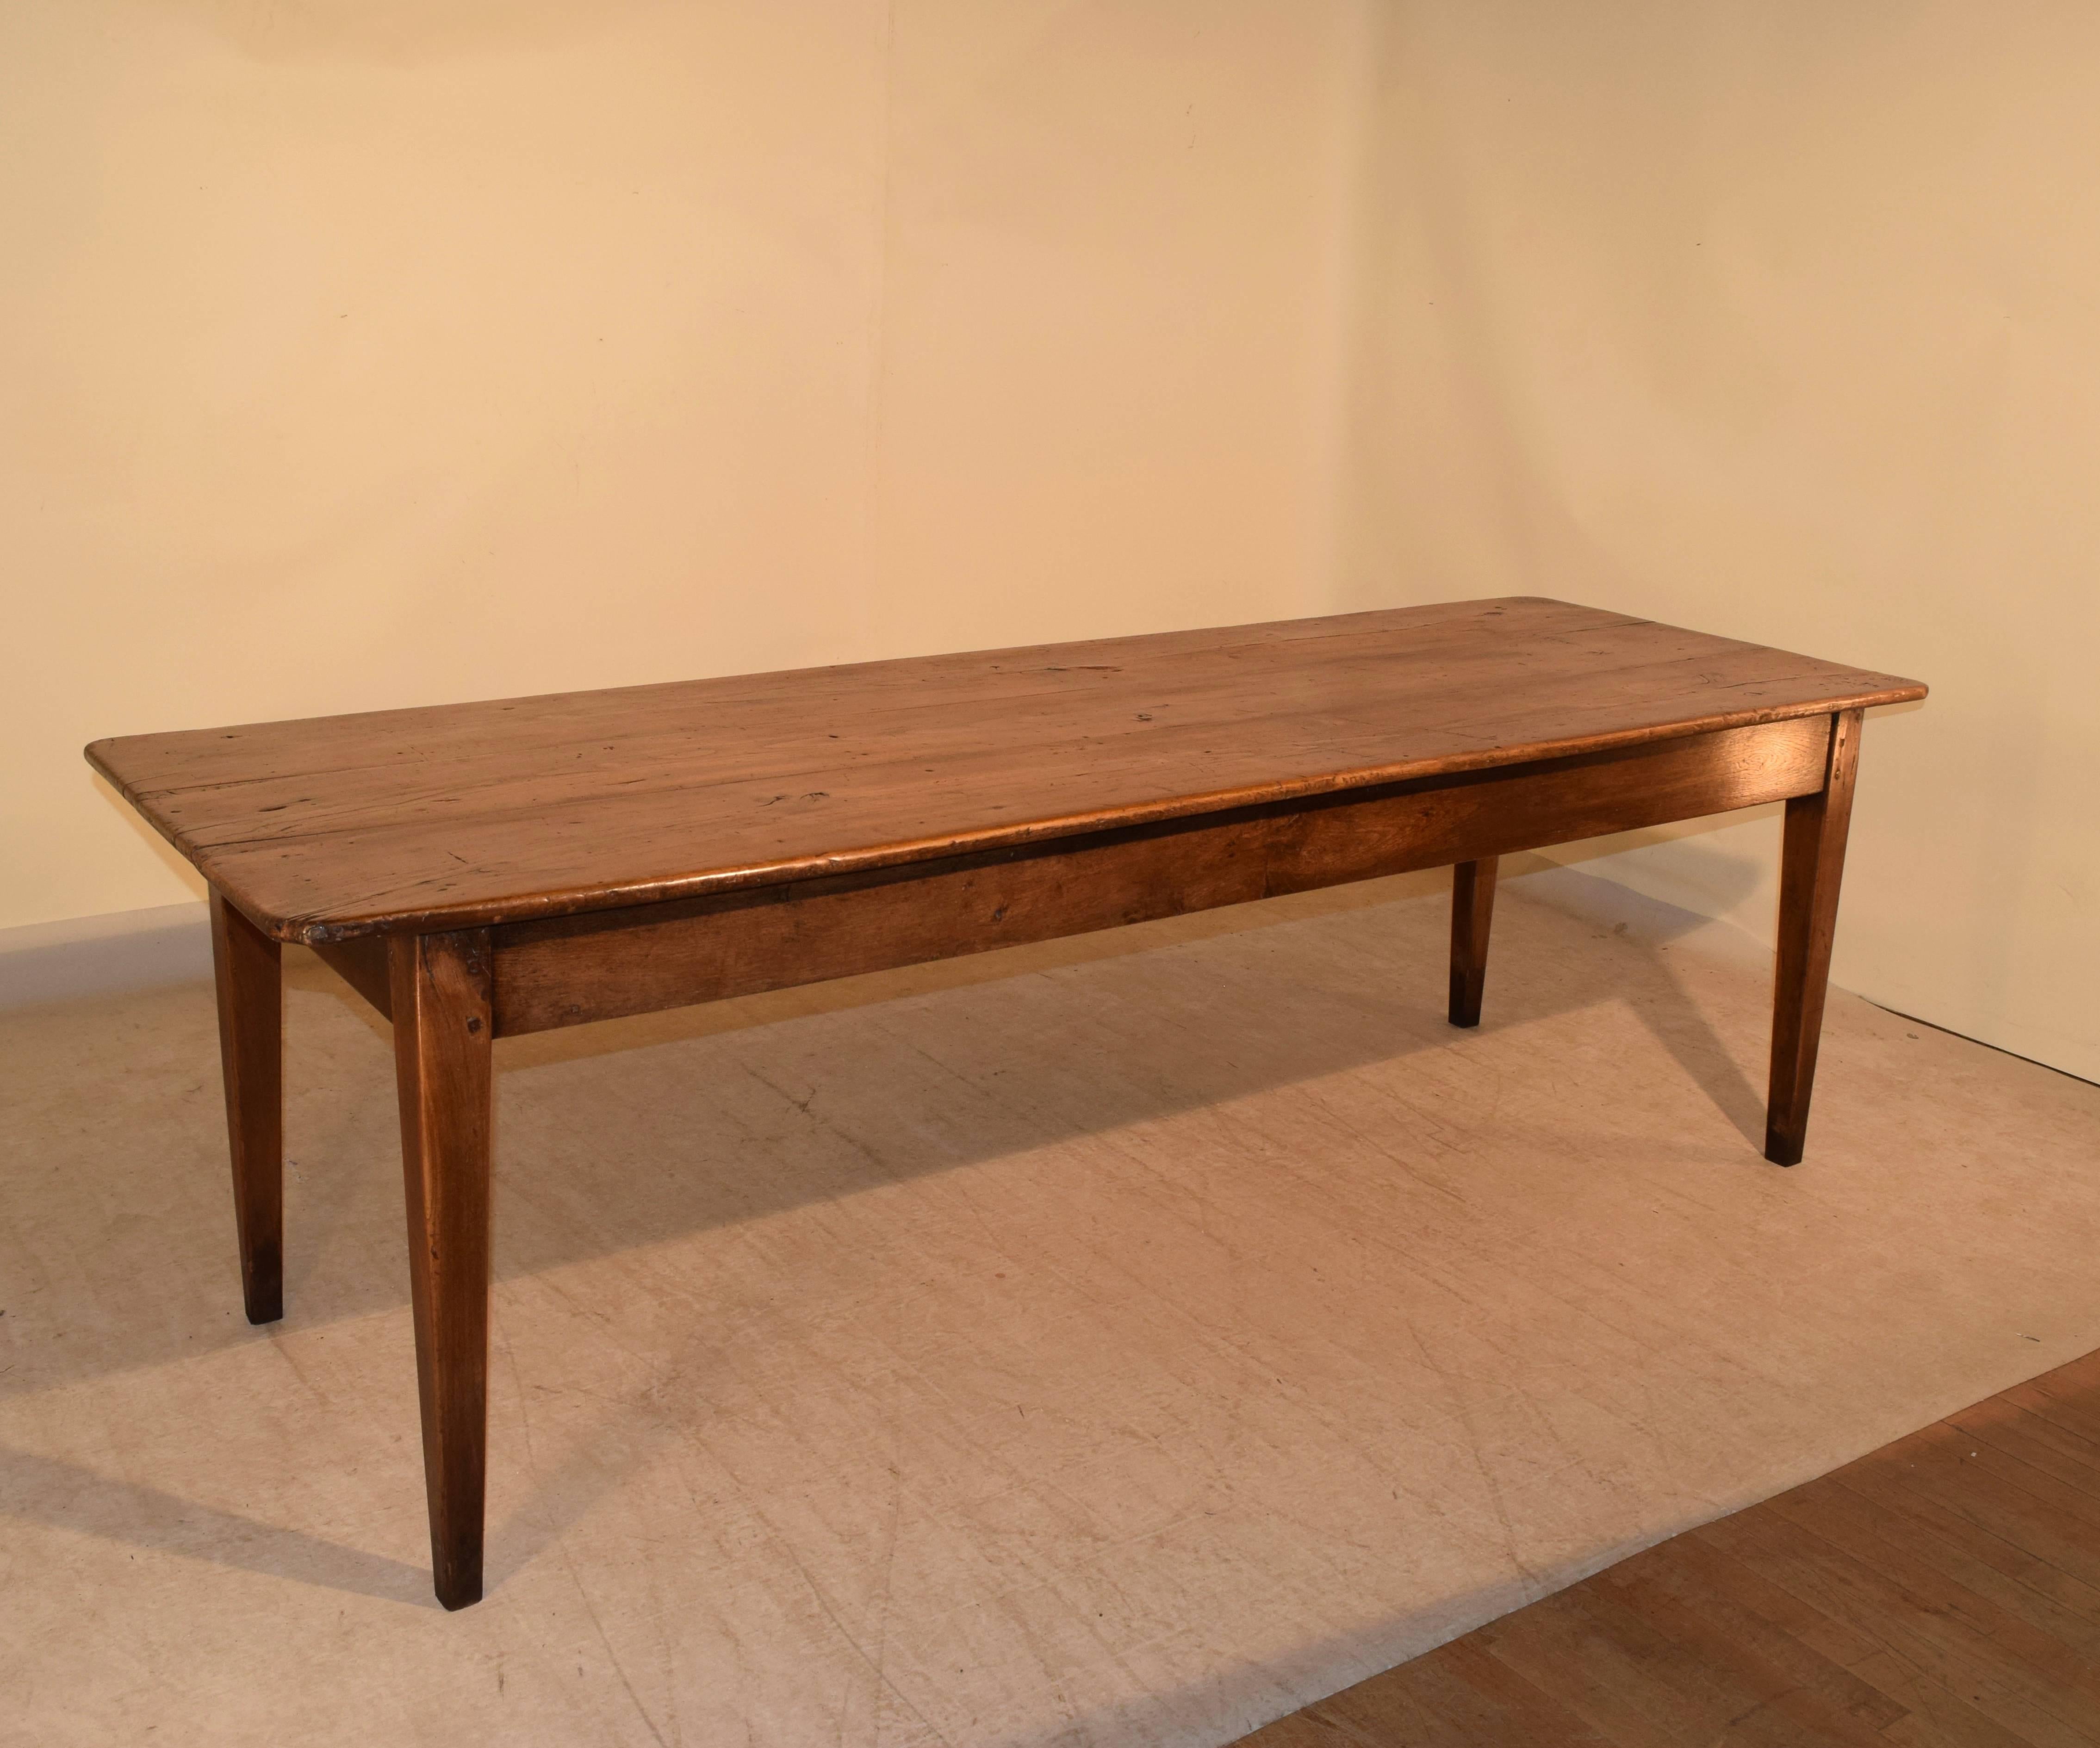 19th century French farm table made from walnut. The top is made up of planks and follows down to a simple apron, and is supported on tapered legs. The apron measures 23.88